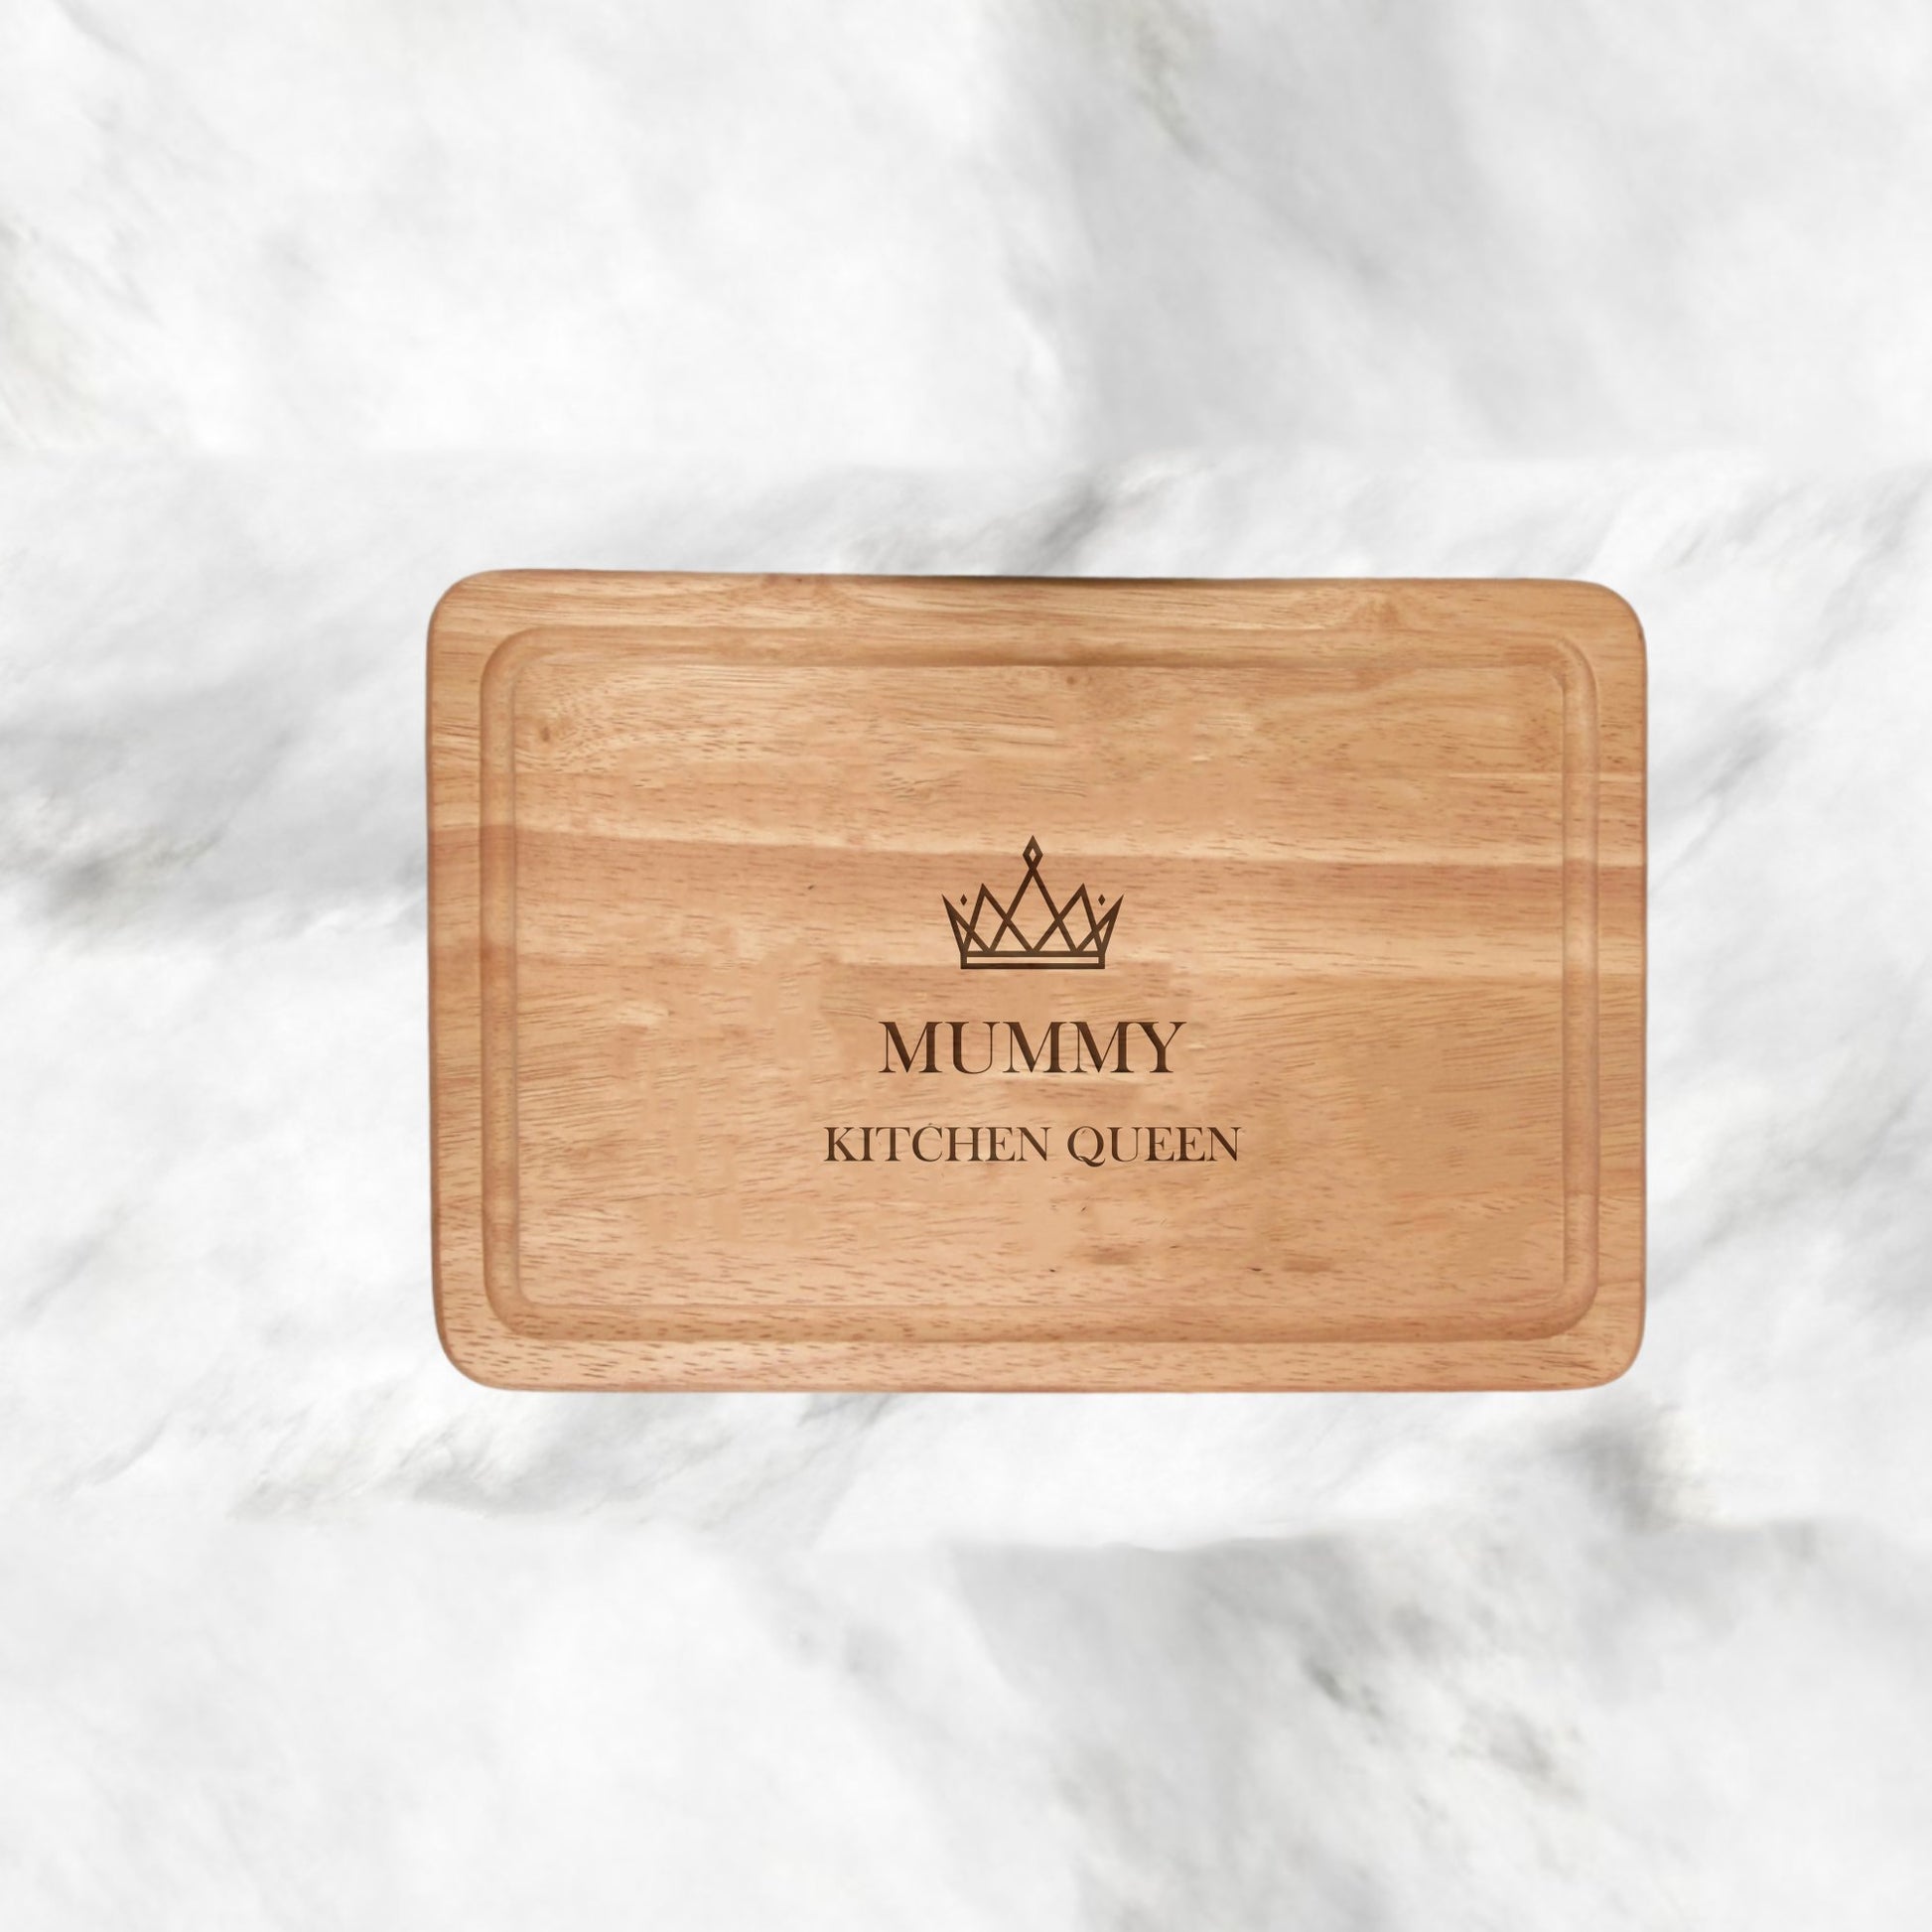 Explore kitchen luxury with our Queen Crown Chopping Board on Shopify, 300x200mm. Perfect for gifting - engrave 2 lines on premium wood for a unique touch.